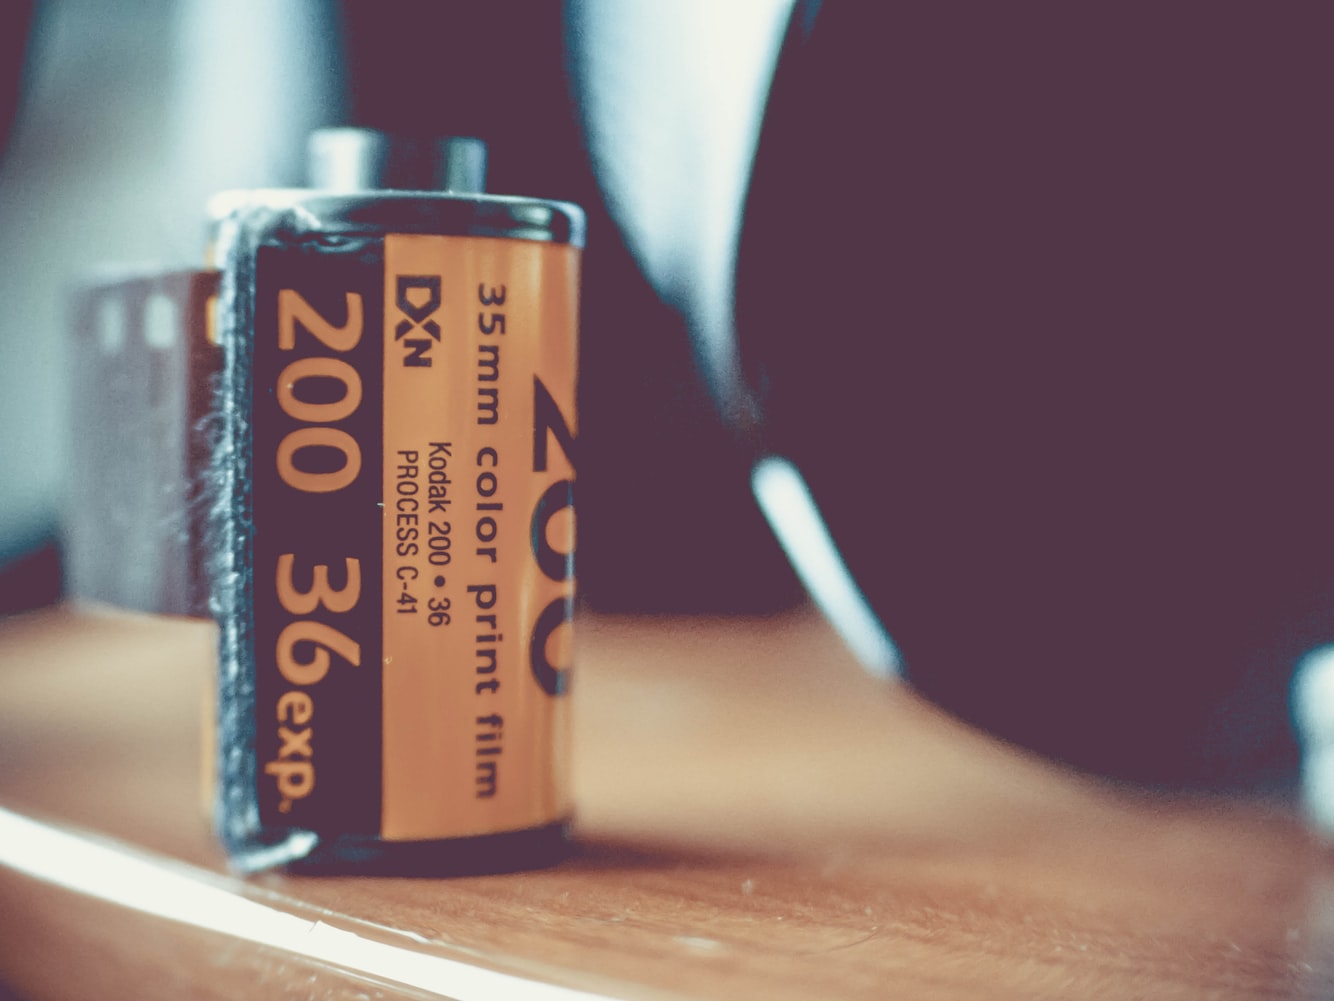 Does My Film Need to Be Developed Before Digitizing? – Legacybox